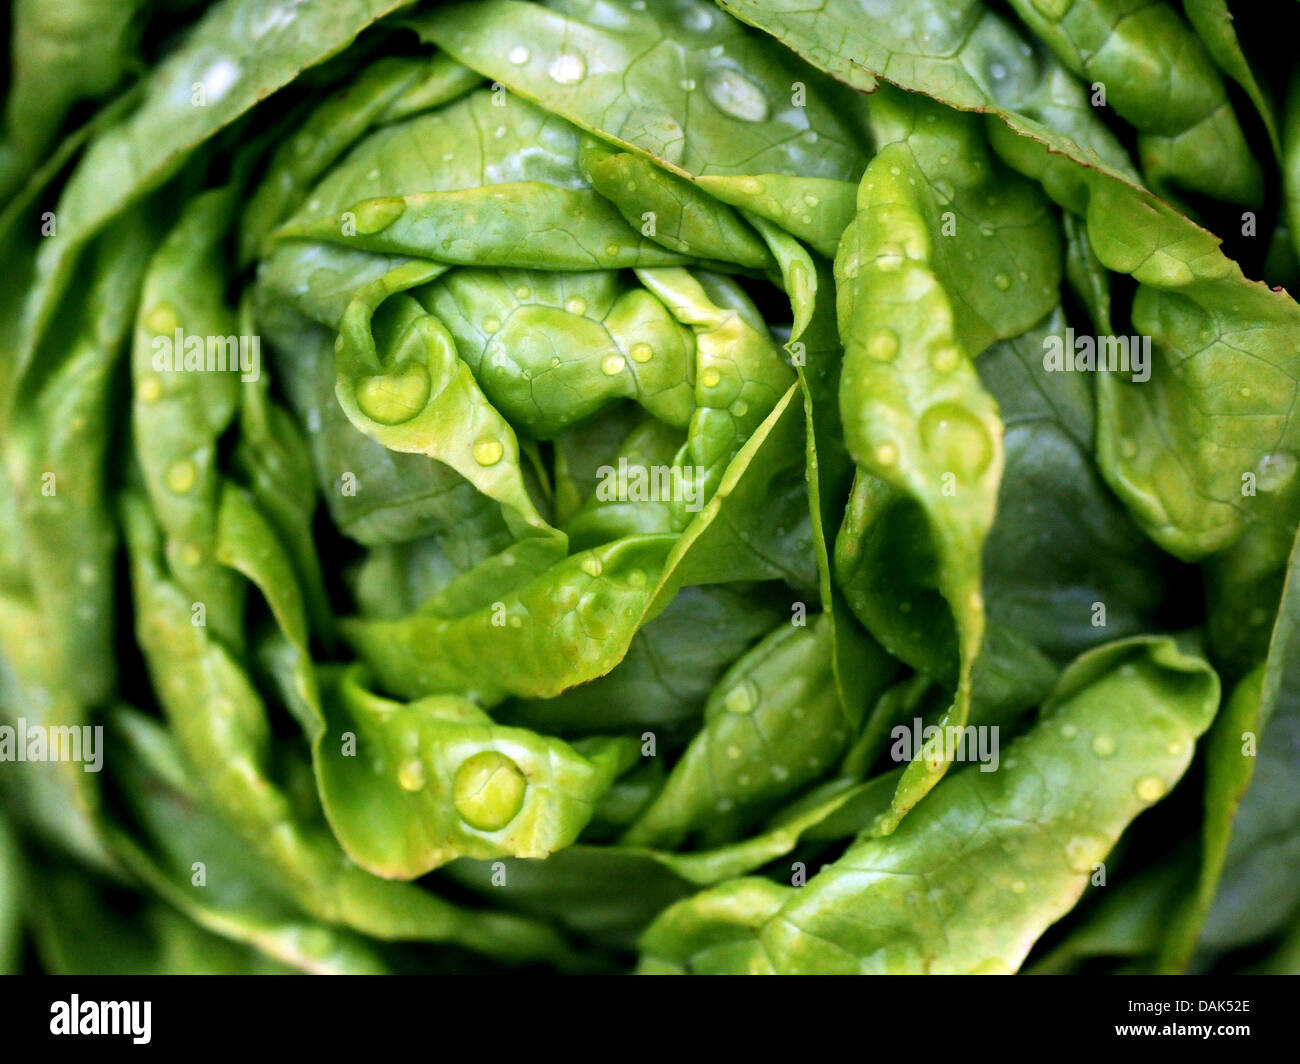 A close up of a fresh green lettuce Stock Photo